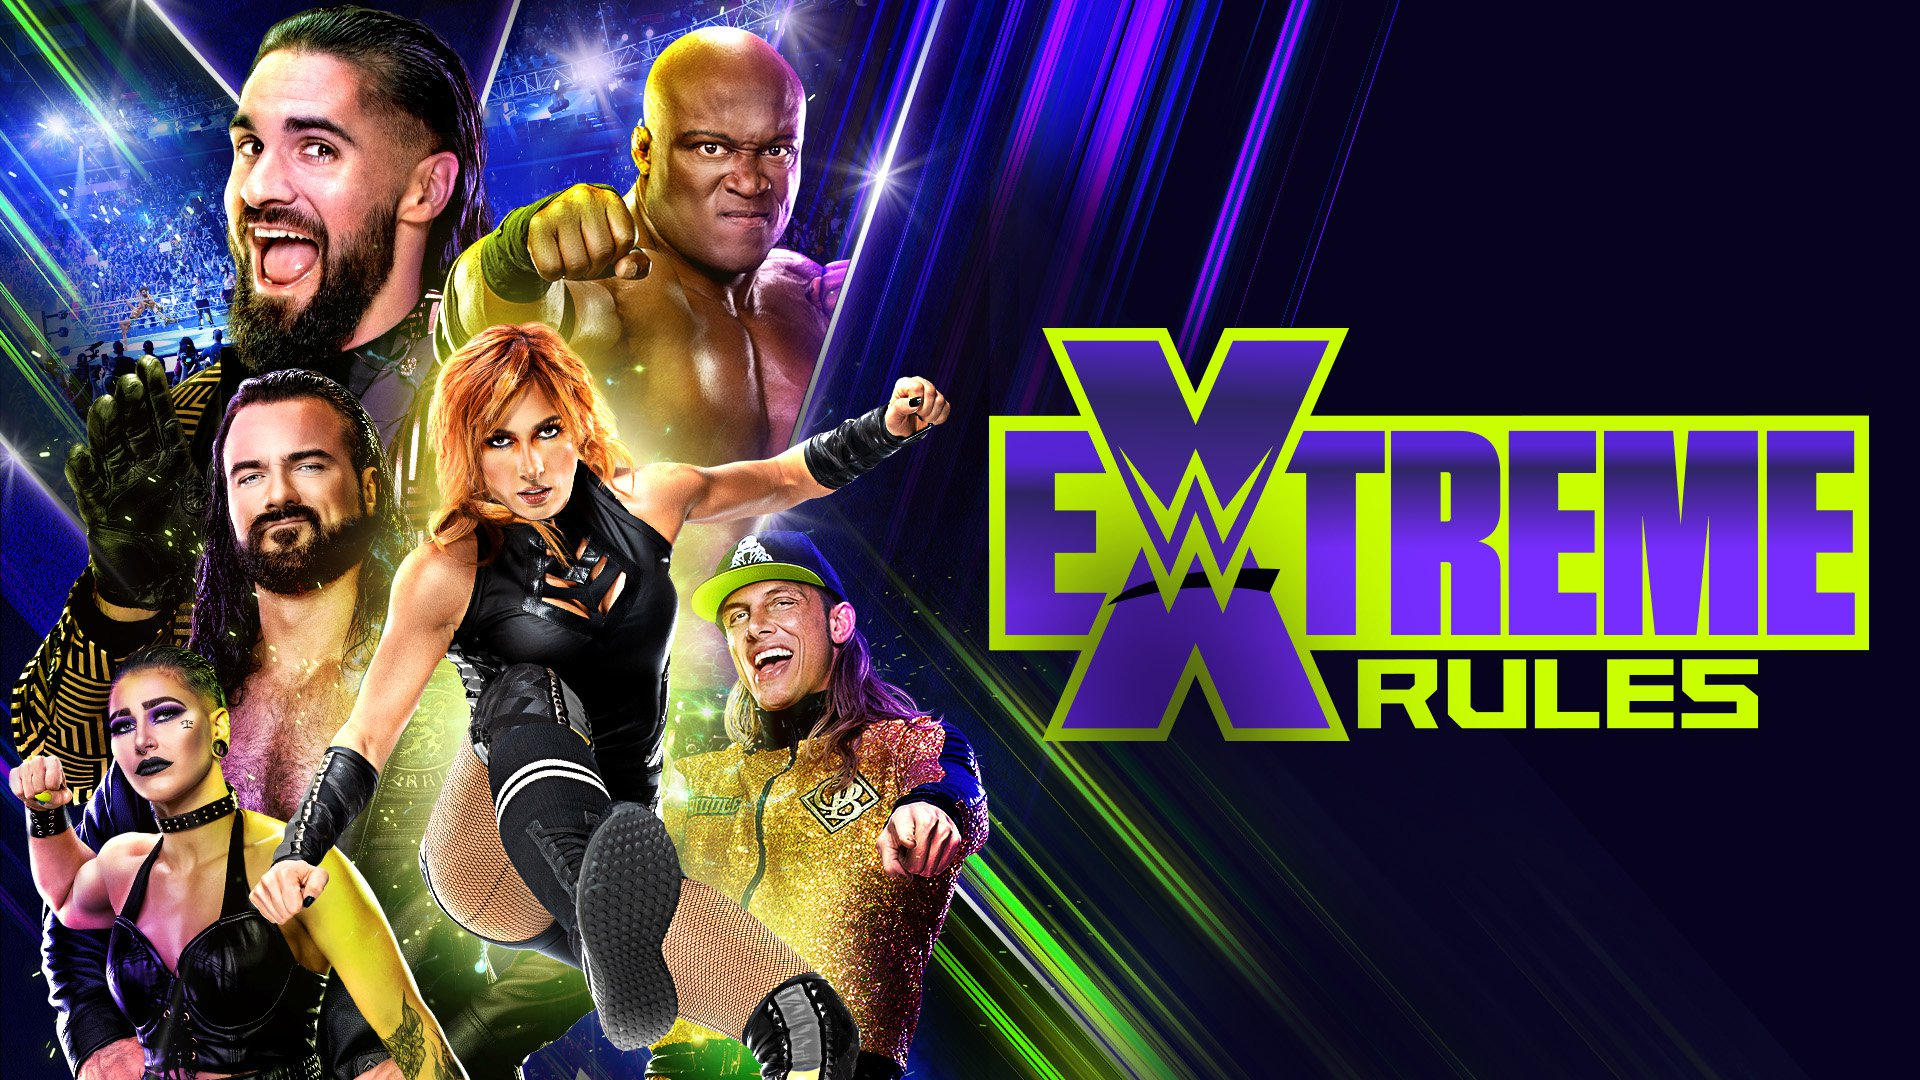 Gimmick Match Revealed for WWE Extreme Rules